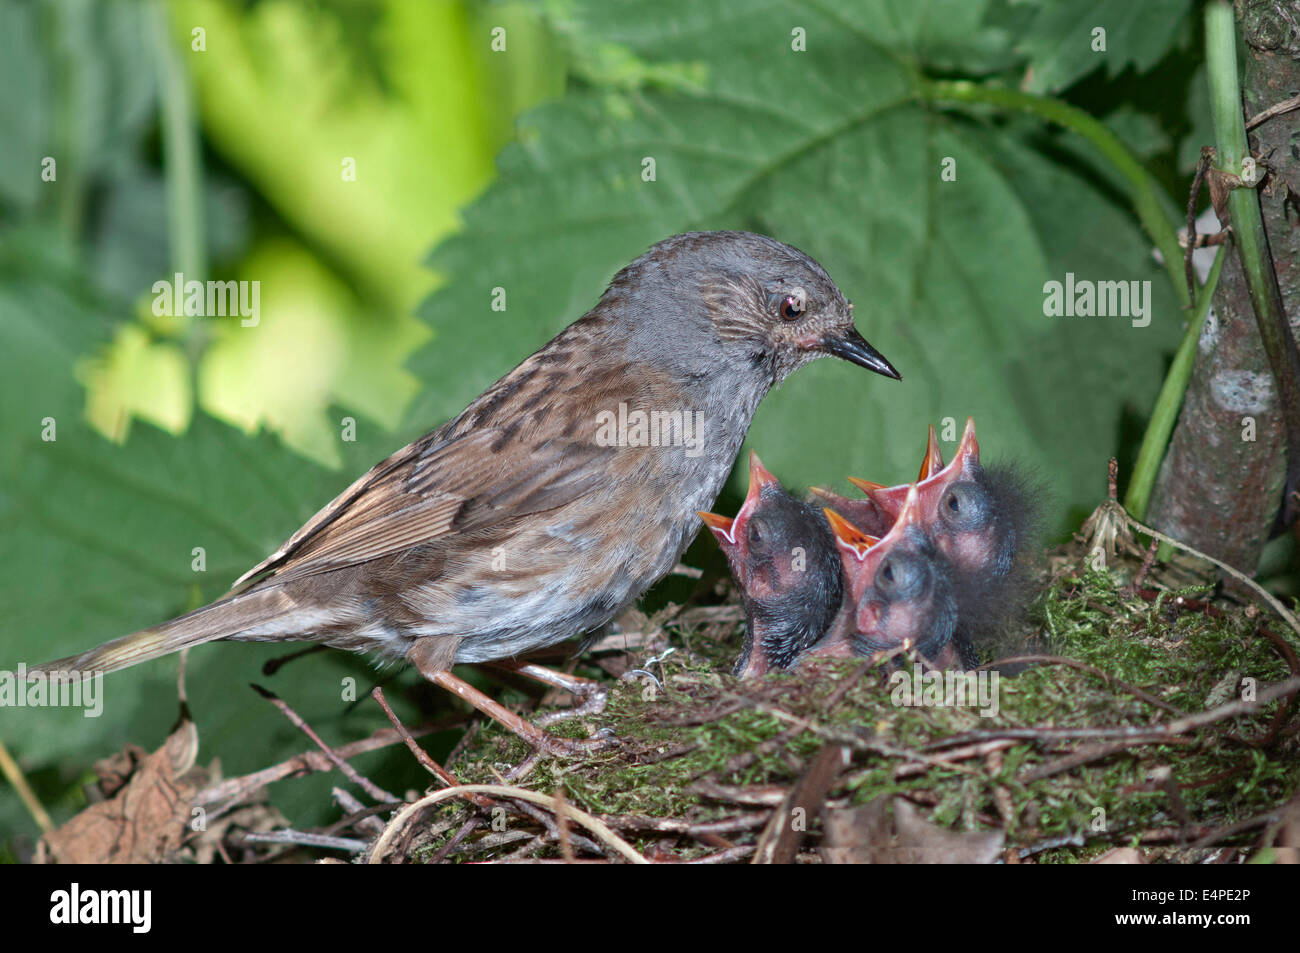 Dunnock (Prunella modularis) at nest with young birds, Baden-Württemberg, Germany Stock Photo